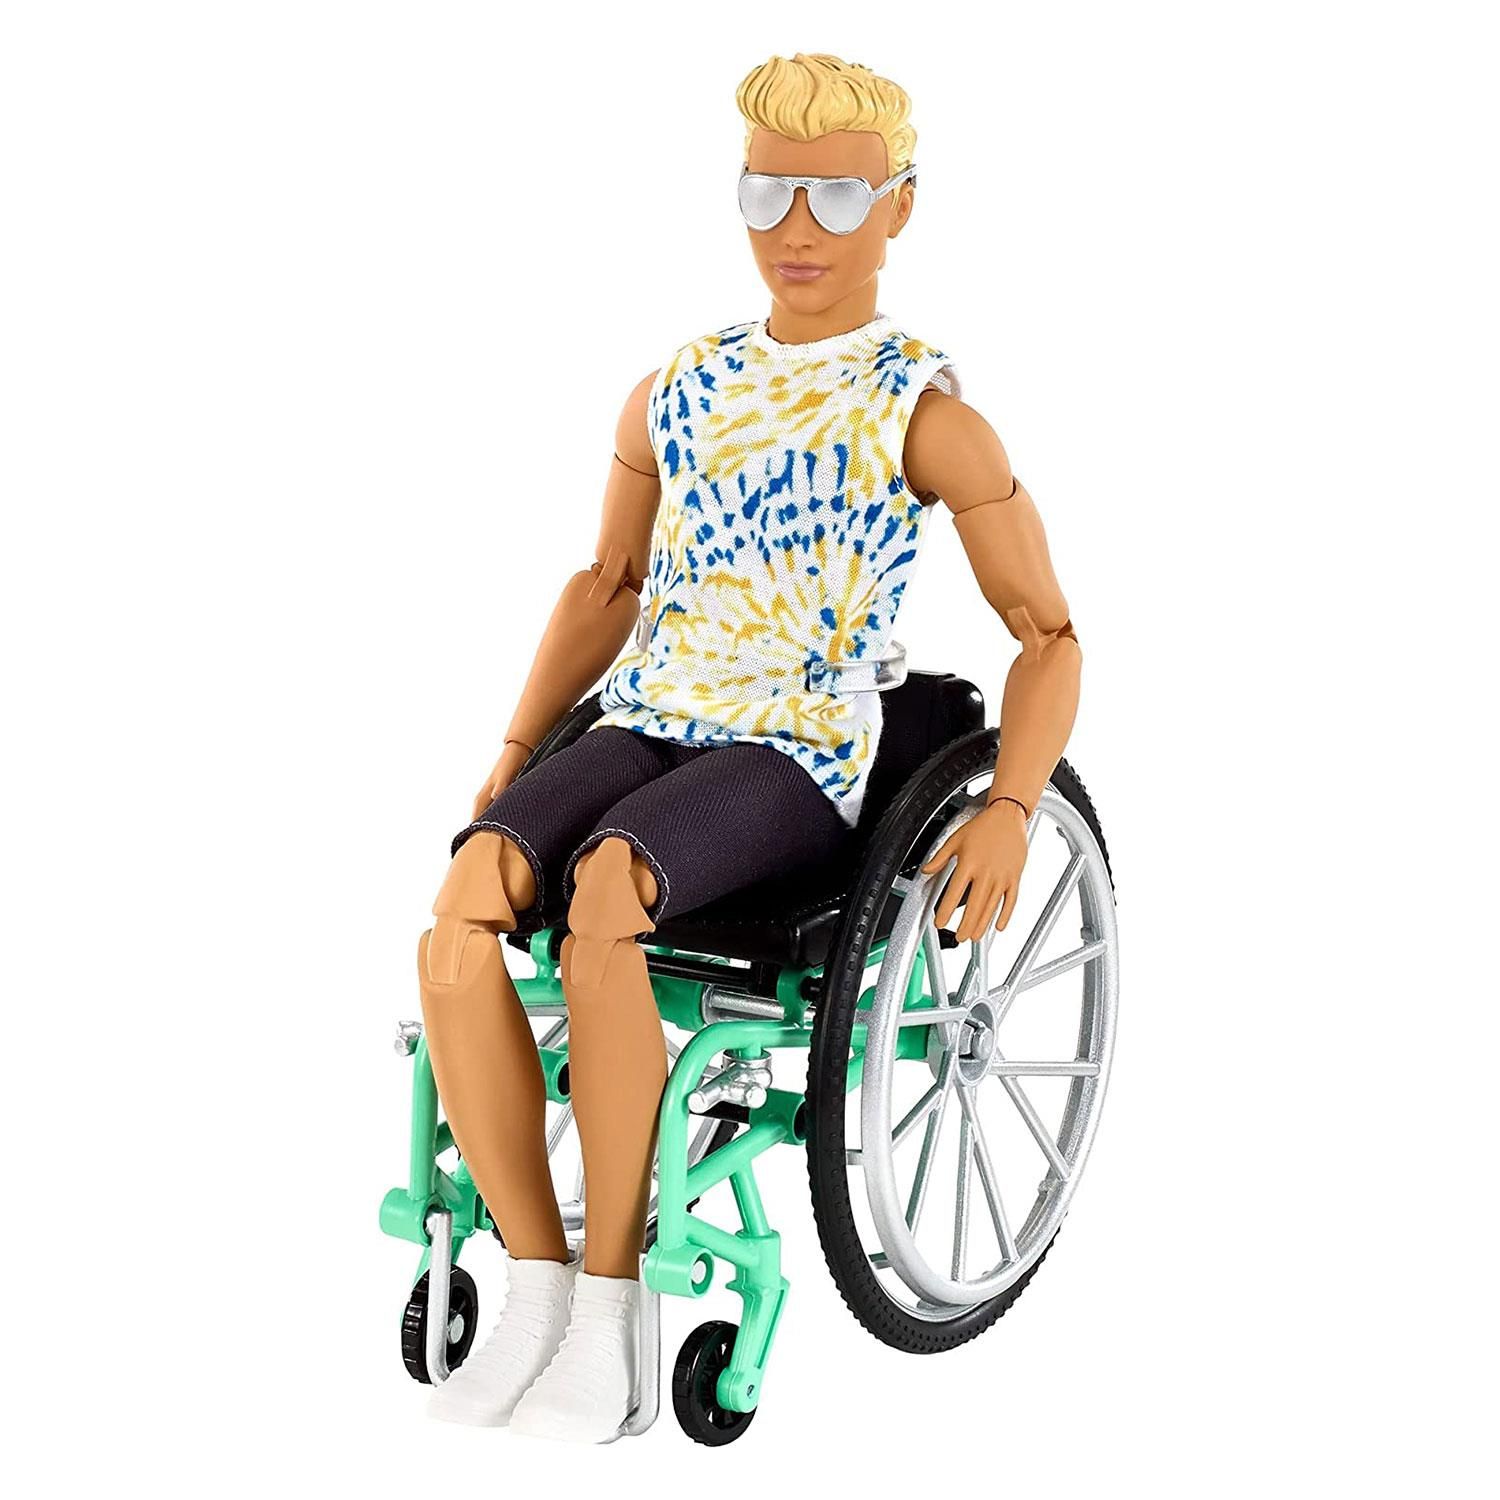 Barbie and Ken Fashionistas celebrate diversity with fashion dolls that encourage real-world storytelling and open-ended dreams! With a wide variety of skin tones, eye colors, hair colors and textures, body types, and fashions, the dolls are designed to reflect the world kids see today. Ken doll inspires new play possibilities with a manual wheelchair and ramp so he can easily get in and out of the Barbie Dreamhouse (sold separately, subject to availability). Kids can collect Fashionistasz2 dolls for infinite ways to play out stories, express their own style, and discover that fashion is fun for everyone! Includes doll-wearing fashions and accessories. Each is sold separately, subject to availability. Ken dolls cannot stand alone. Flat shoes fit dolls with articulated ankles or flat feet. Colors and decorations may vary.

Features:
The latest line of Barbie and Ken Fashionistas dolls includes different body types and a mix of skin tones, eye colors, hair colors, hairstyles and so many fashions inspired by the latest trends!
Ken doll comes with a wheelchair that has rolling wheels and a working brake, plus a ramp that works with the Barbie Dreamhouse (sold separately).
The doll also features 22 'joints' - in the neck, upper arms, elbows, wrists, torso, hips, upper legs, knees, and ankles to play out all kinds of motions in and out of the wheelchair.
He wears a white top with a blue and yellow tie-dye print, black shorts, white sneakers, and silvery sunglasses.
Makes a great gift for kids 3 years and older - they can play with style, play out stories and discover Barbie!

Box Contains Barbie Ken Doll #167 with Wheelchair & Ramp.